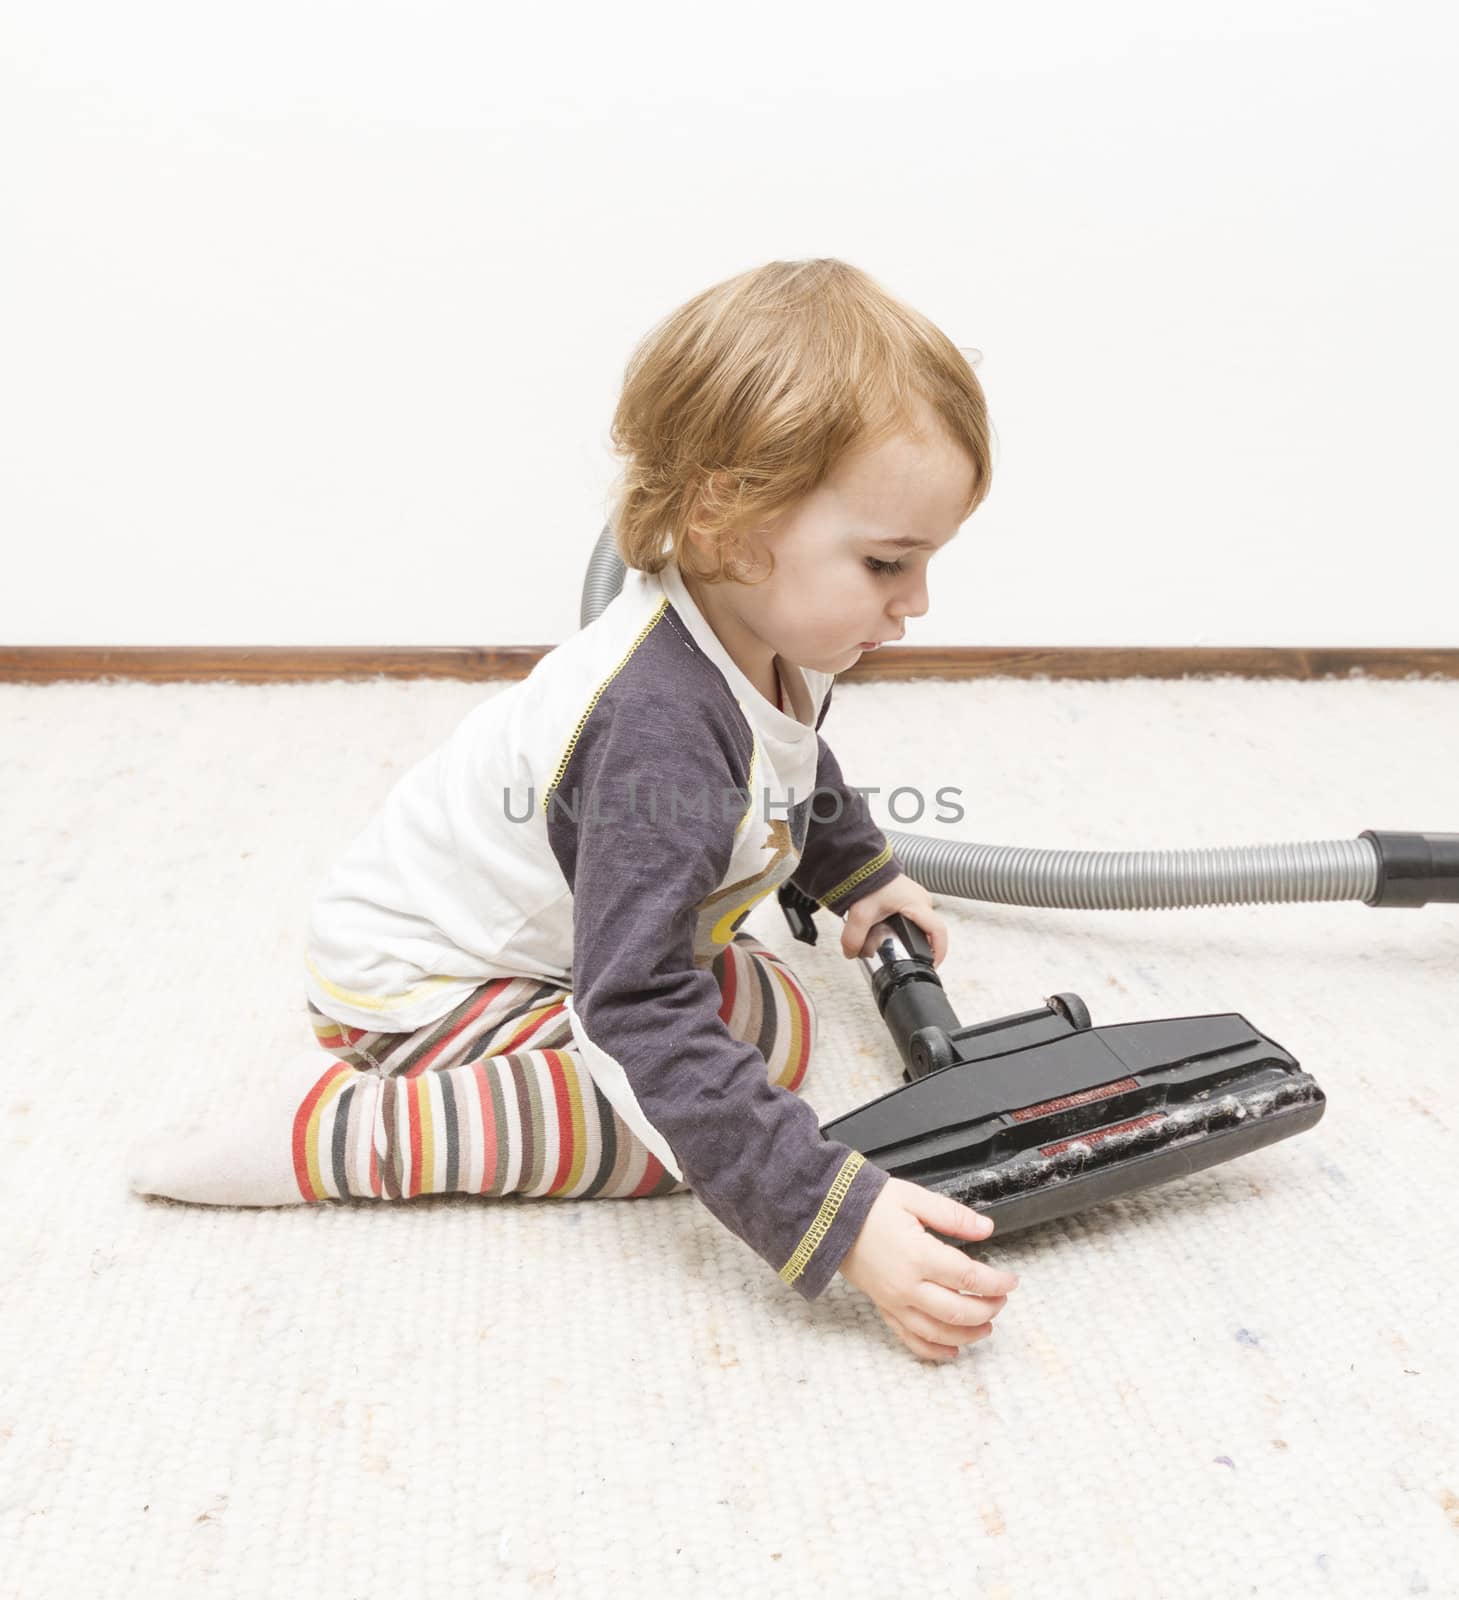 young child cleaning vacuum cleaner by gewoldi